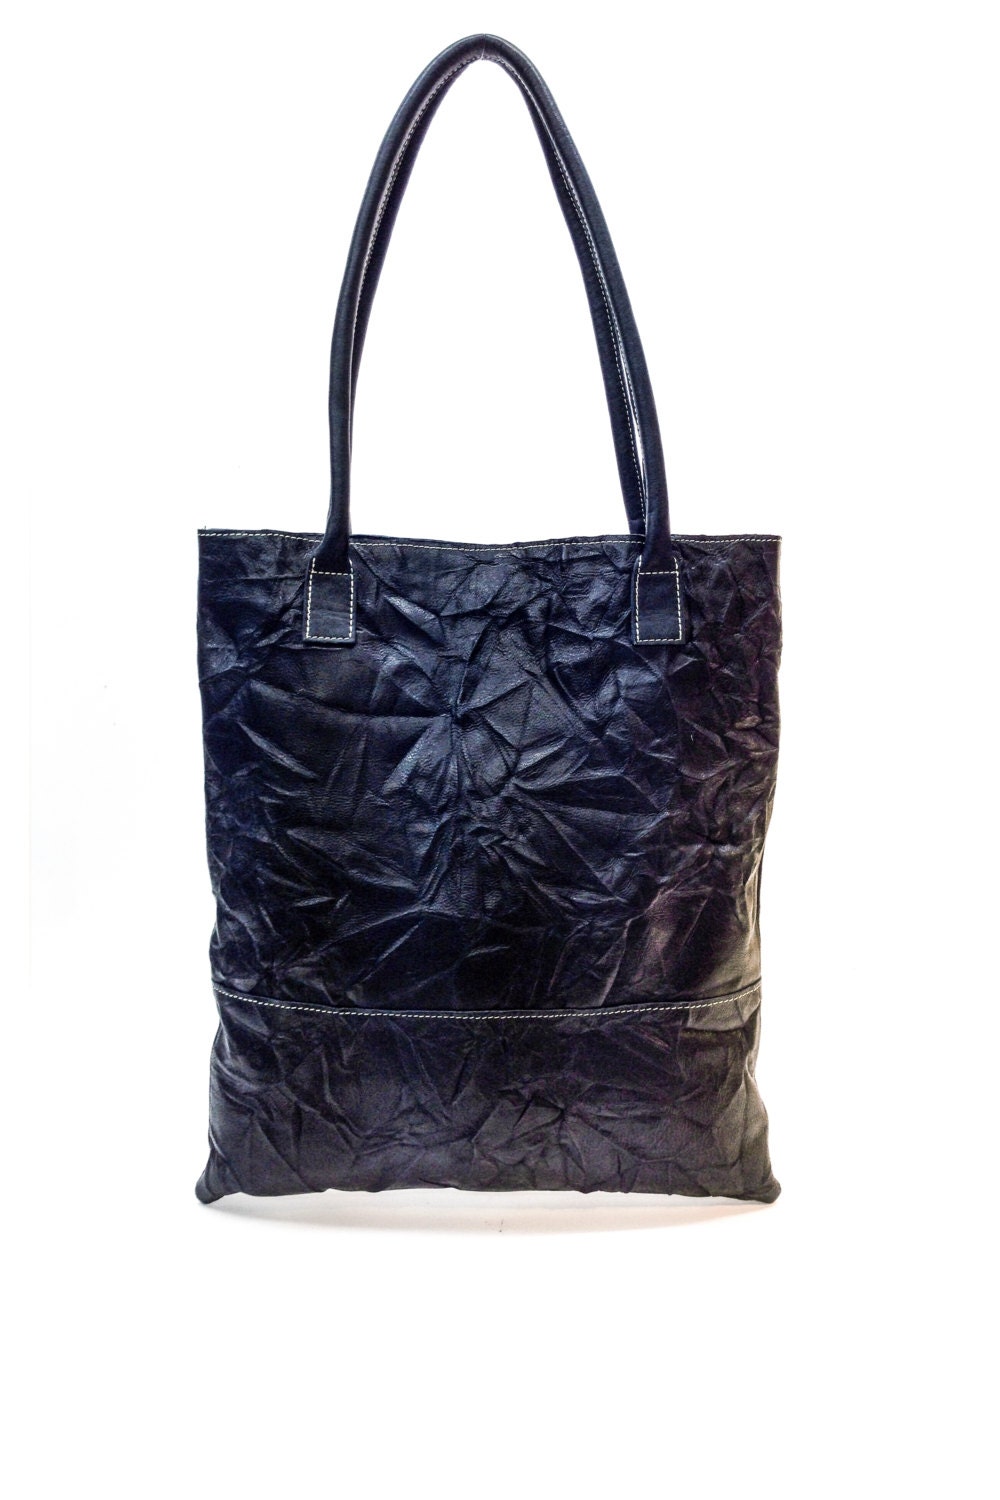 Sale Distressed Leather tote bag Black Leather Bag for